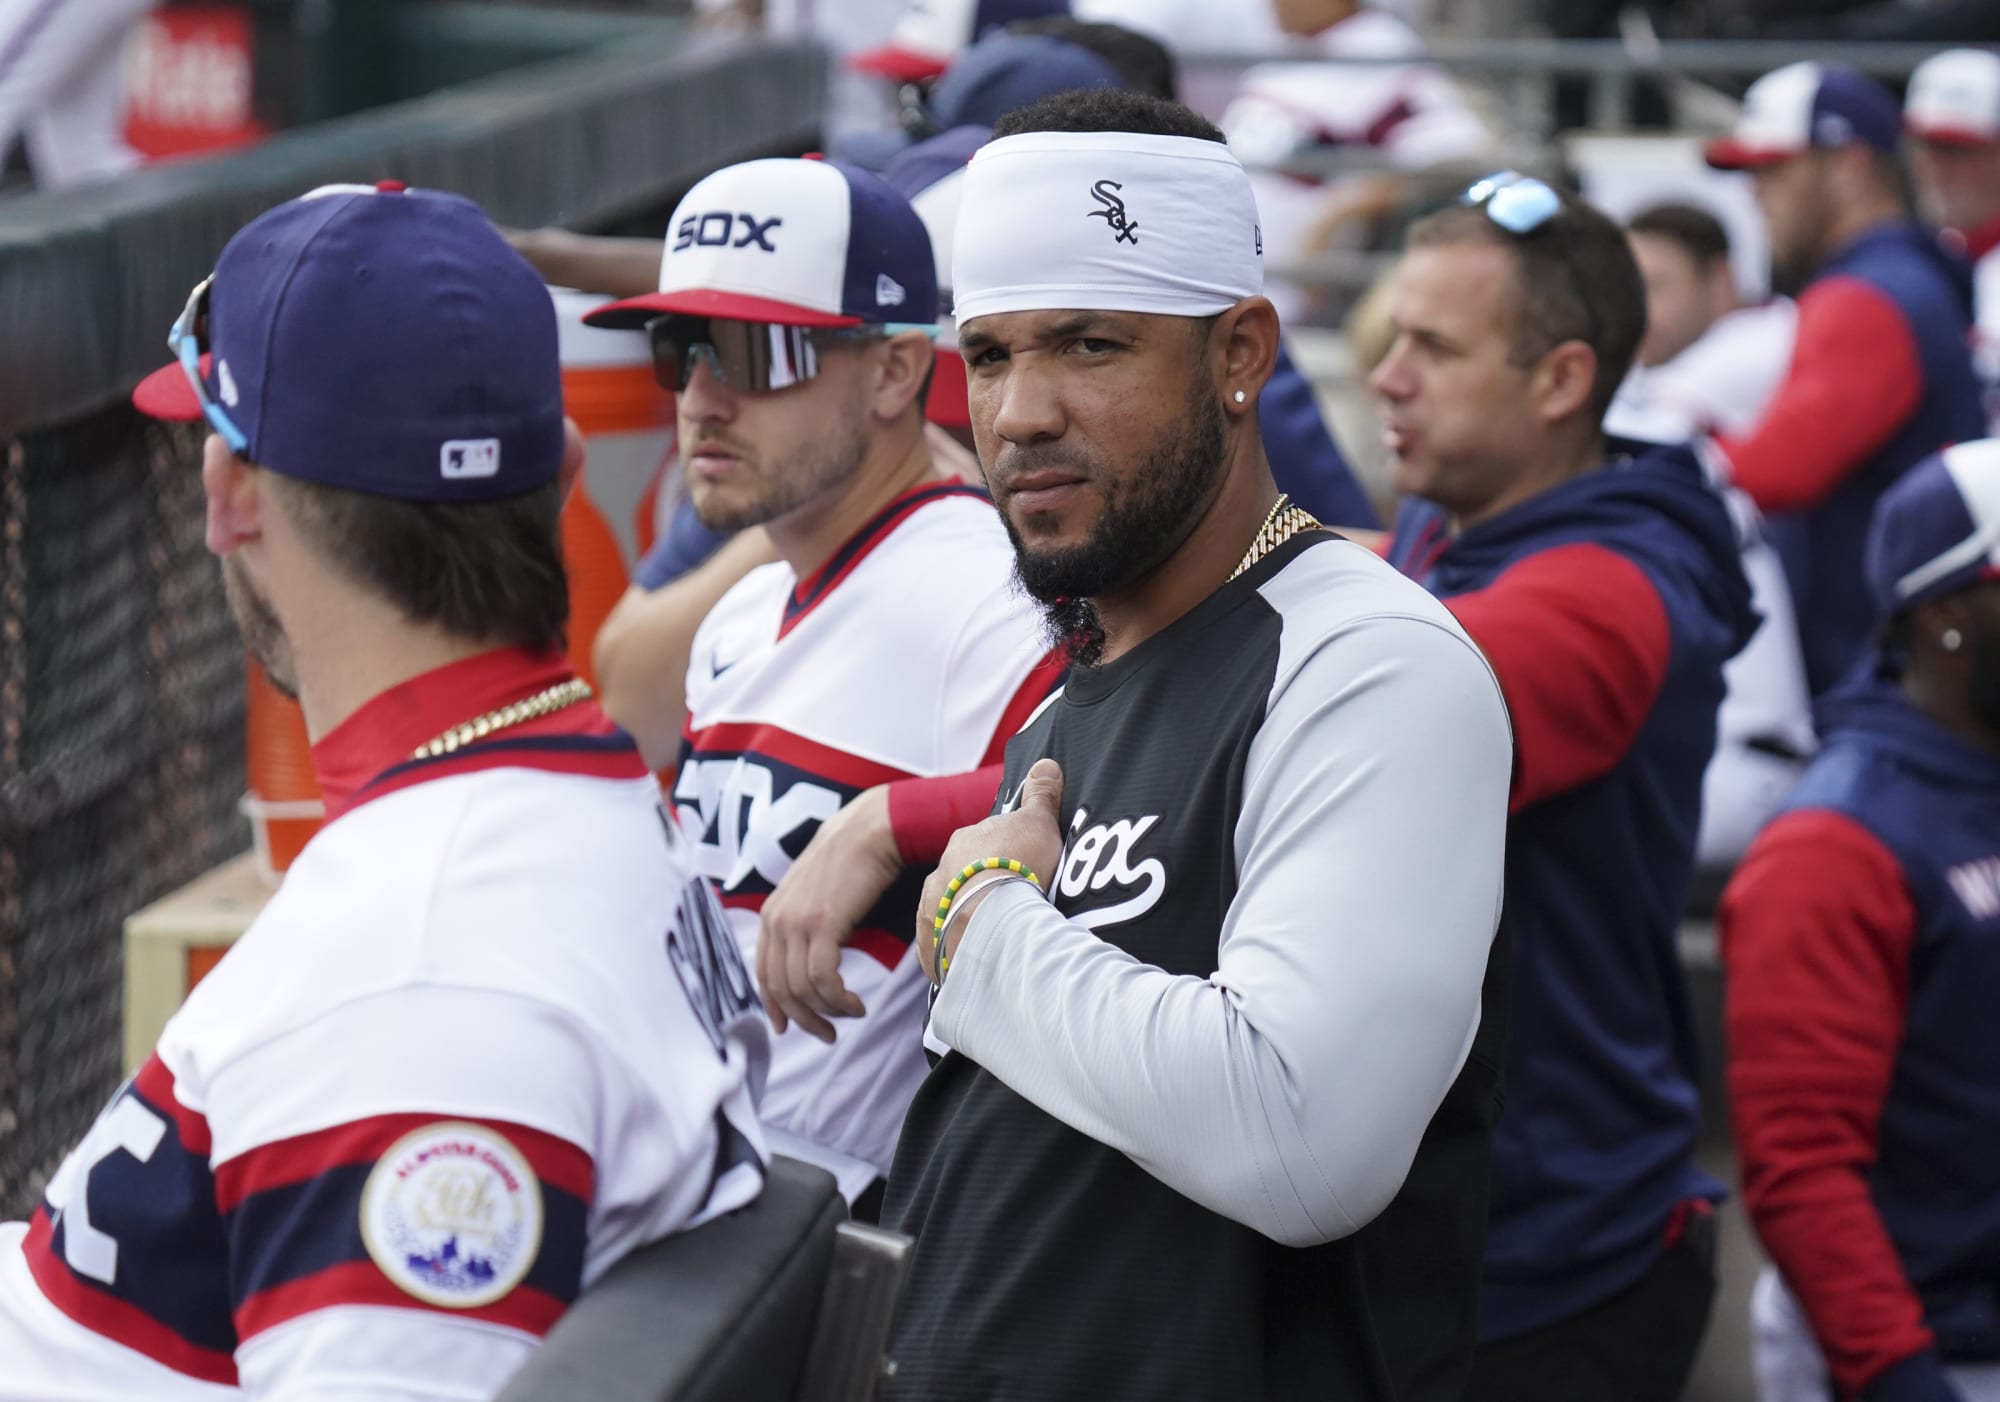 Chicago White Sox: The battle for second place begins